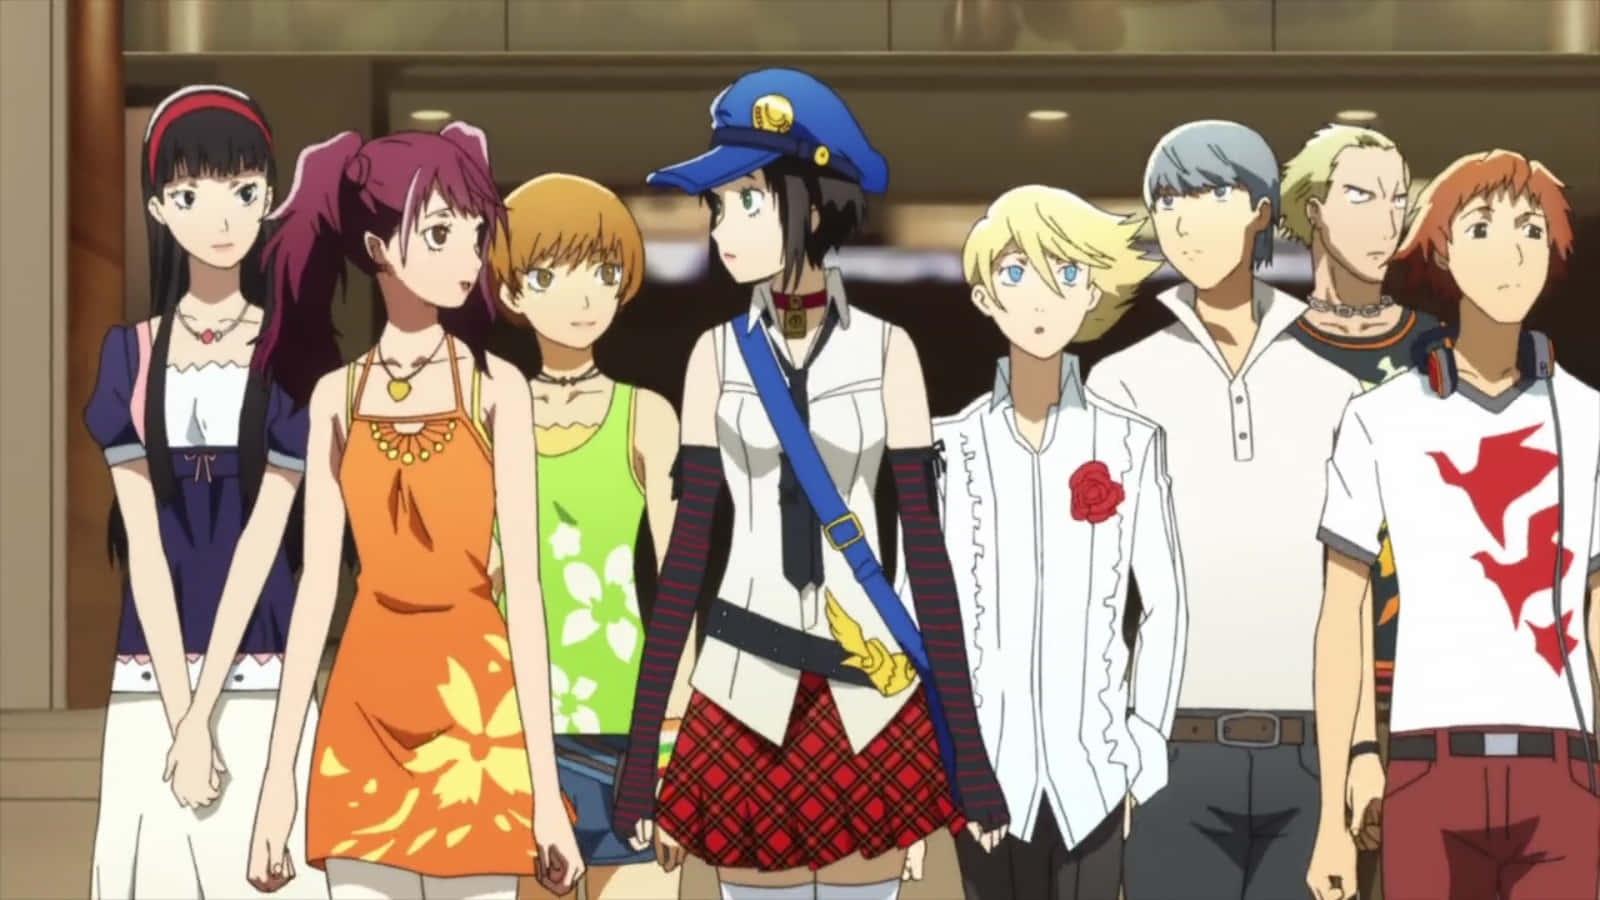 “Happy Times In Persona 4”